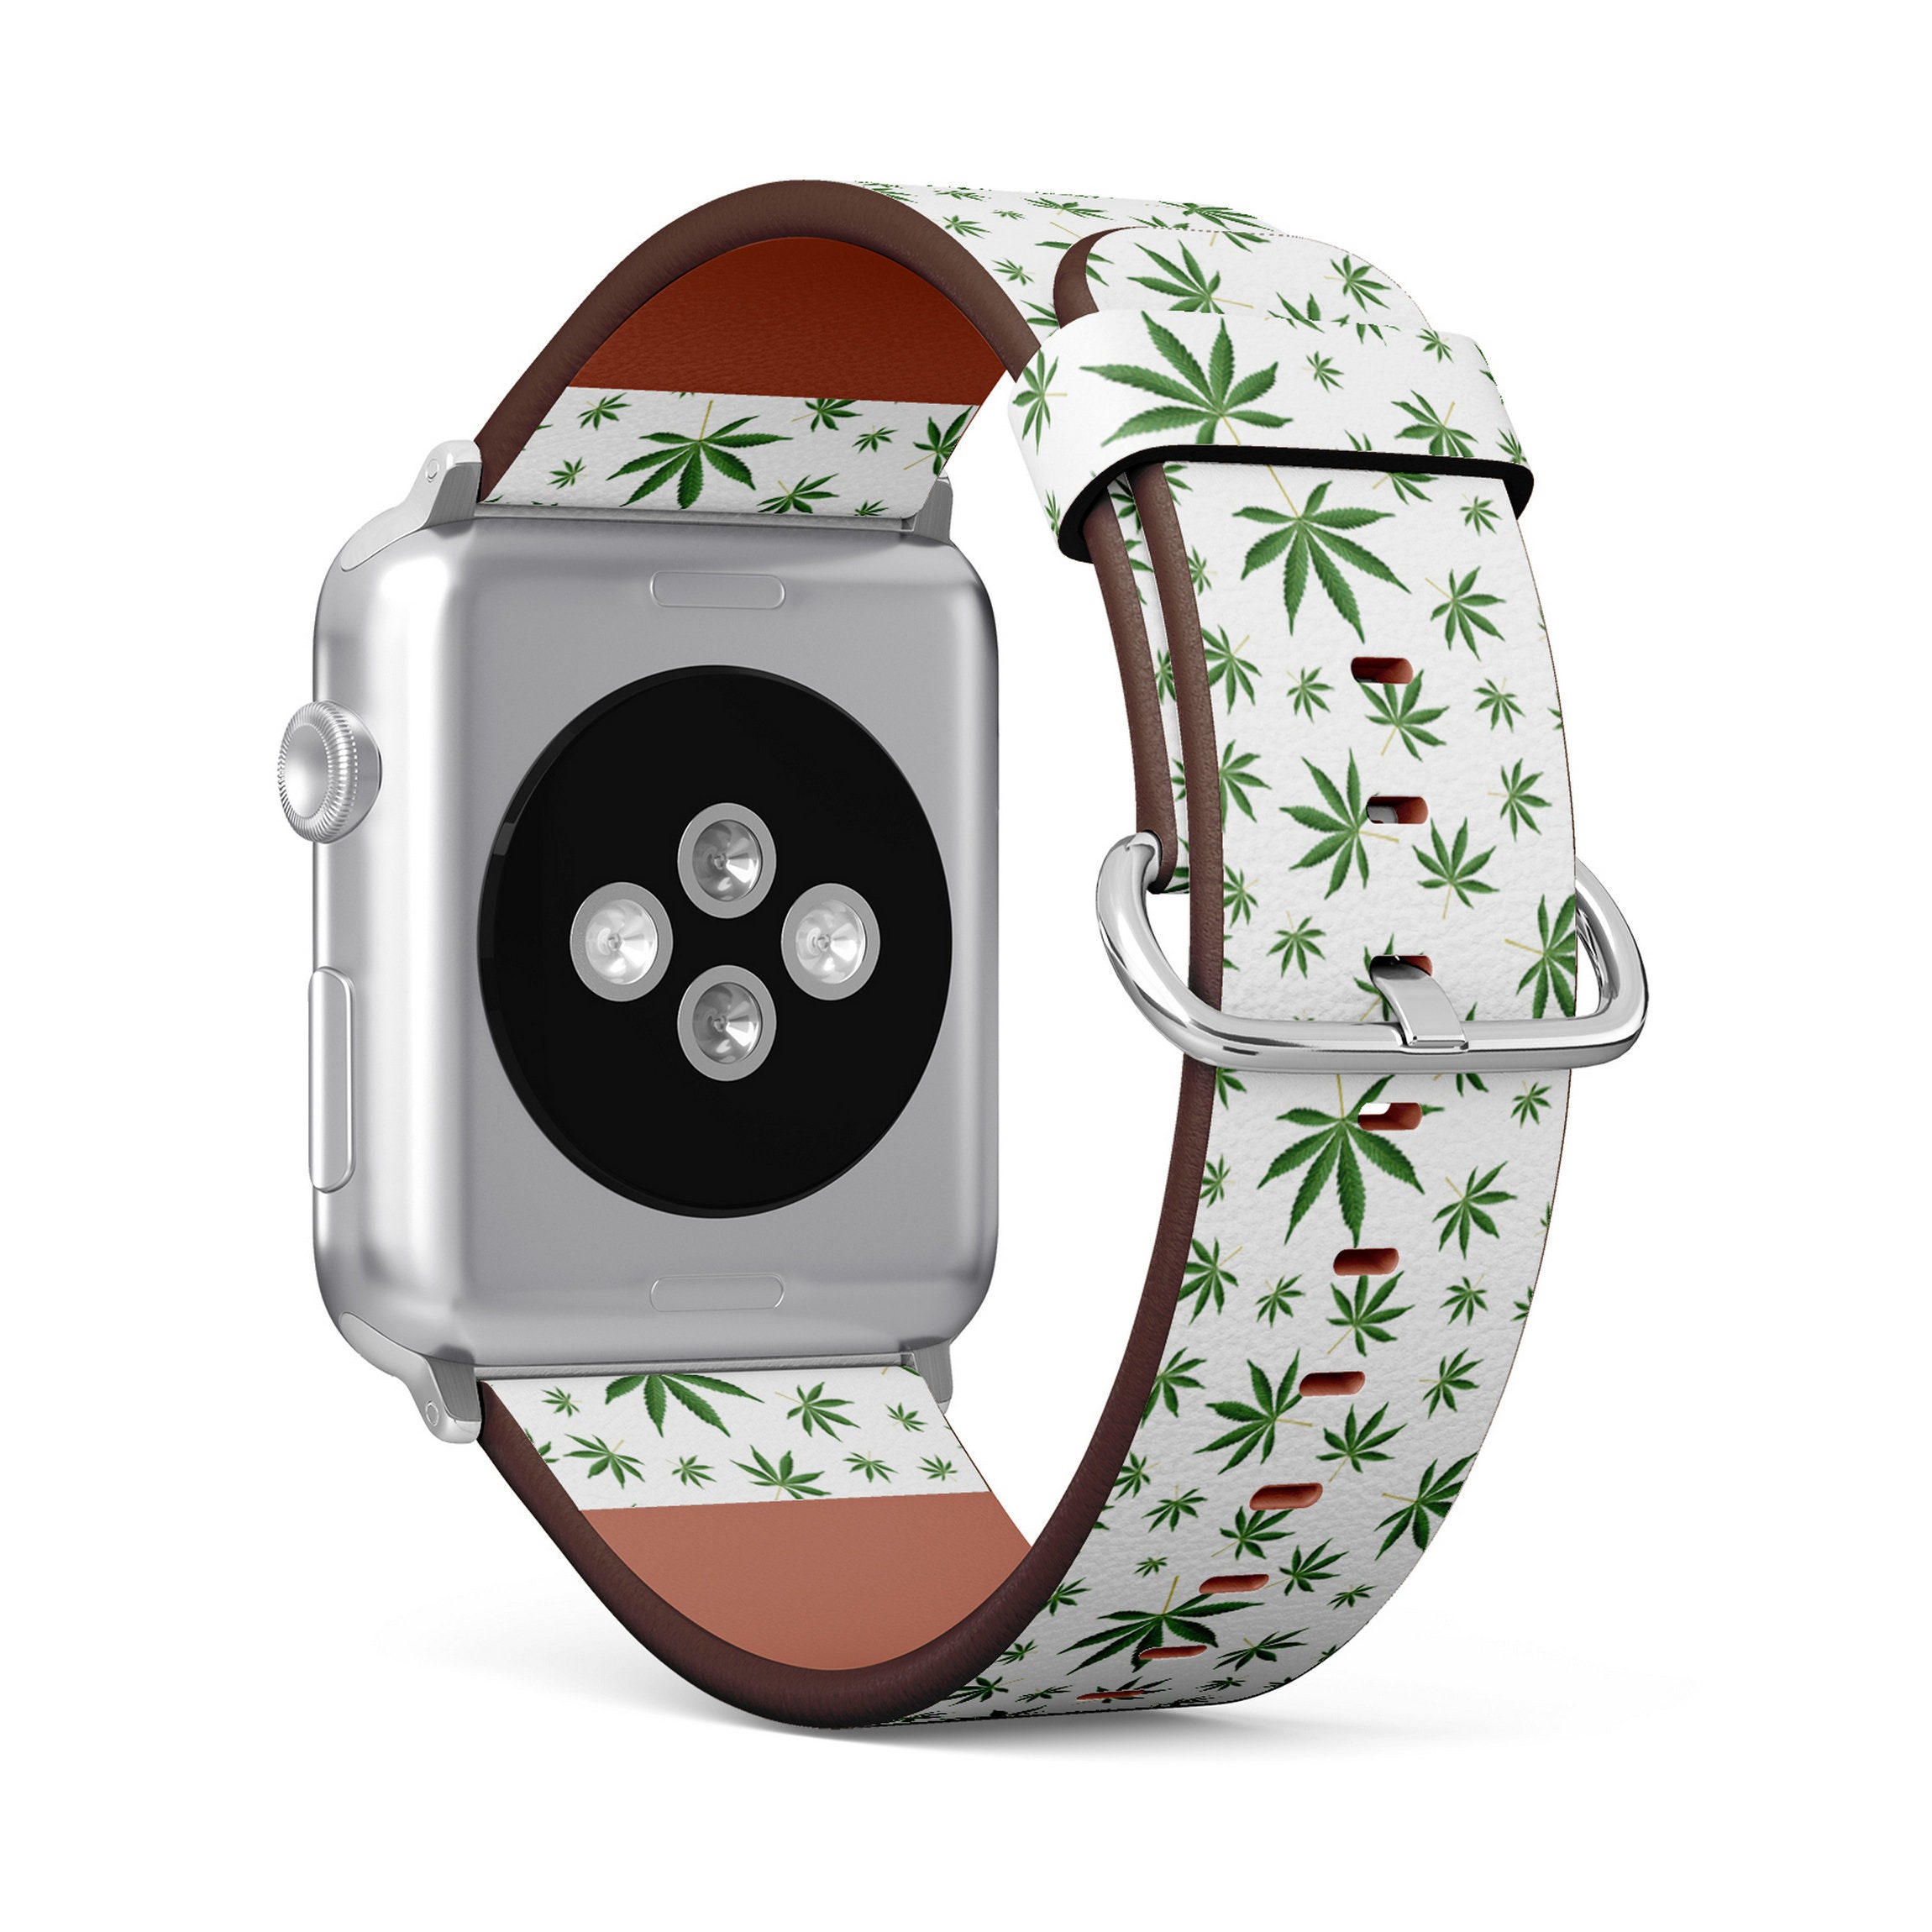 Skite Silicone Engraved Comp w/ Apple Watch Band (Cannabis / Pot